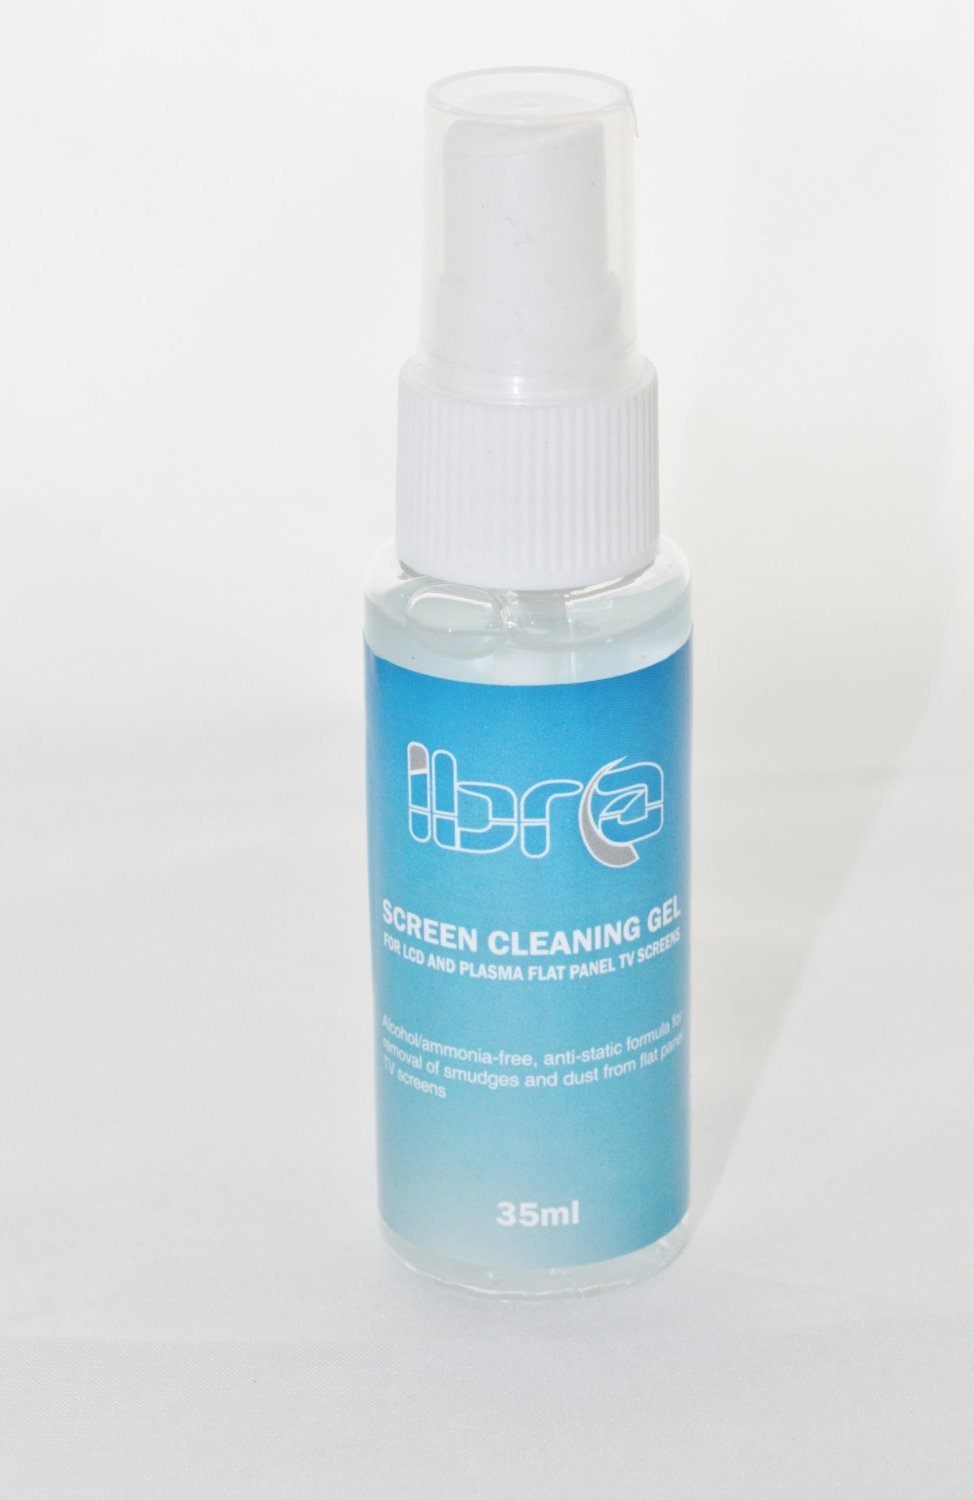 IBRA Mini Screen Cleaner Solution for LED,LCD,Plasma,Computer Monitors,Laptop,Tablet Screens,PDA, and Iphone Etc